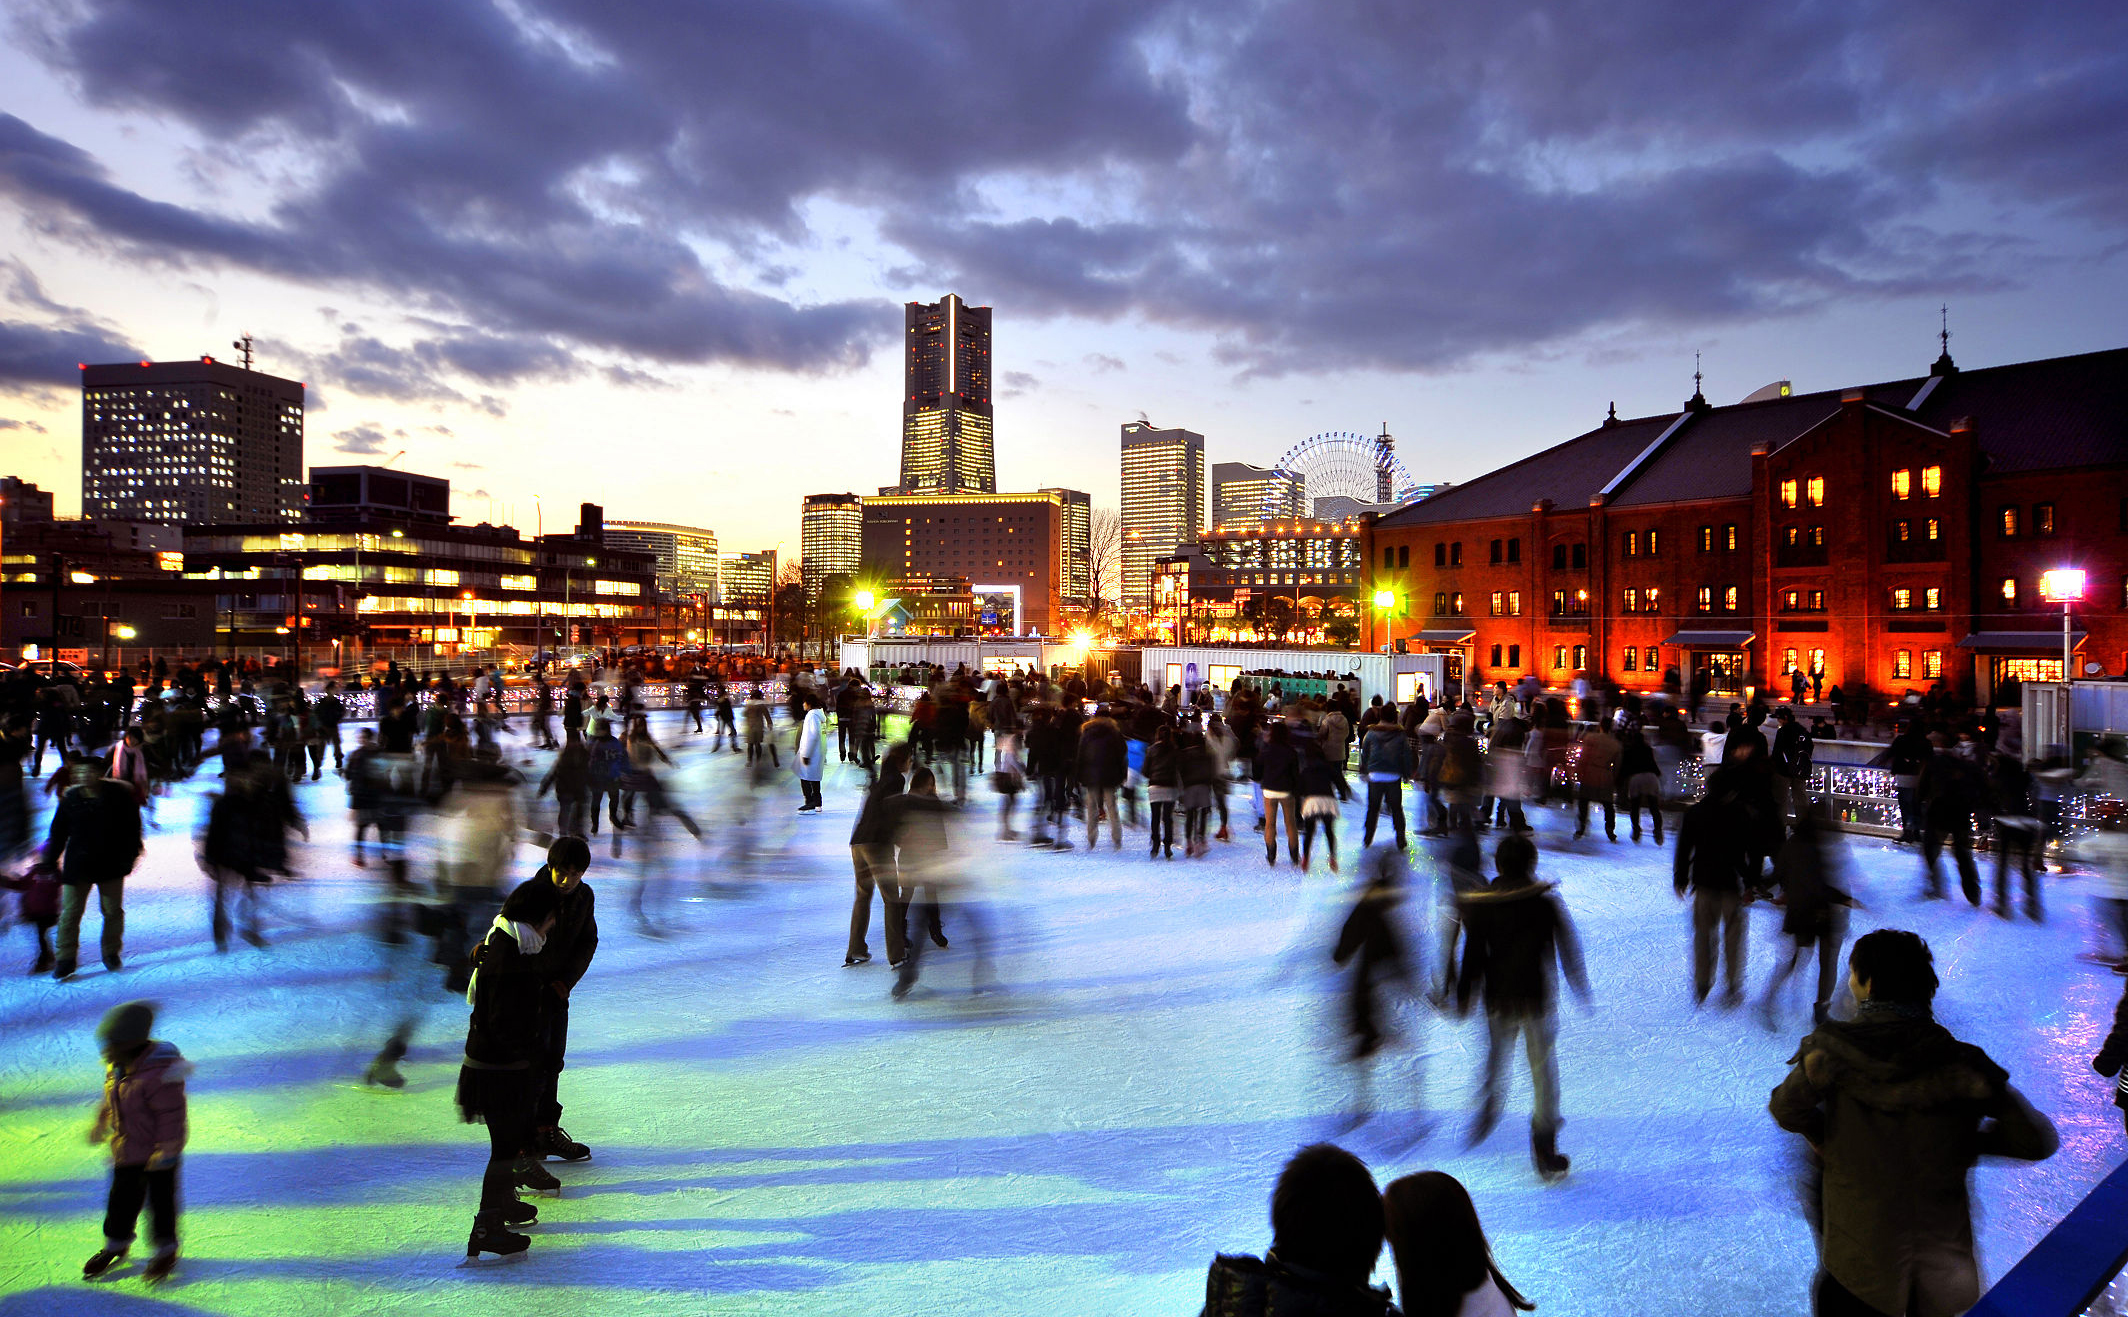 The Yokohama Red Brick Warehouse’s Art Rink welcomes both children and adult skaters with its charming atmosphere over the holidays through Feb. 21. | FILM HOUSE AMANO STUDIO